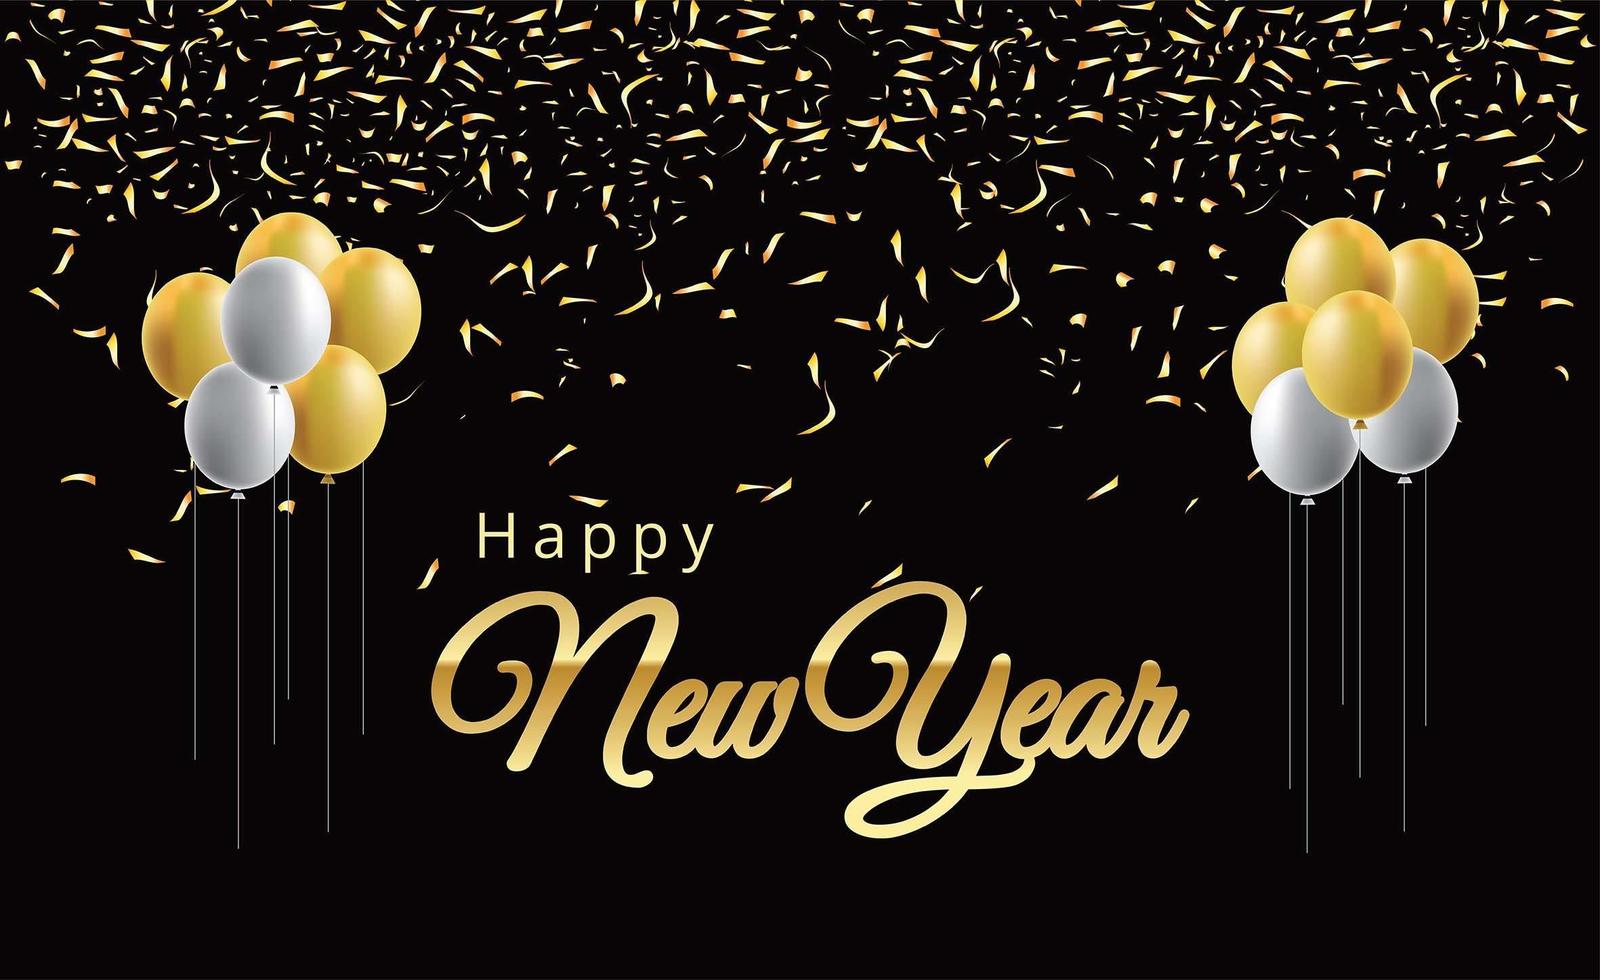 Happy new year balloons and golden metal numbers vector